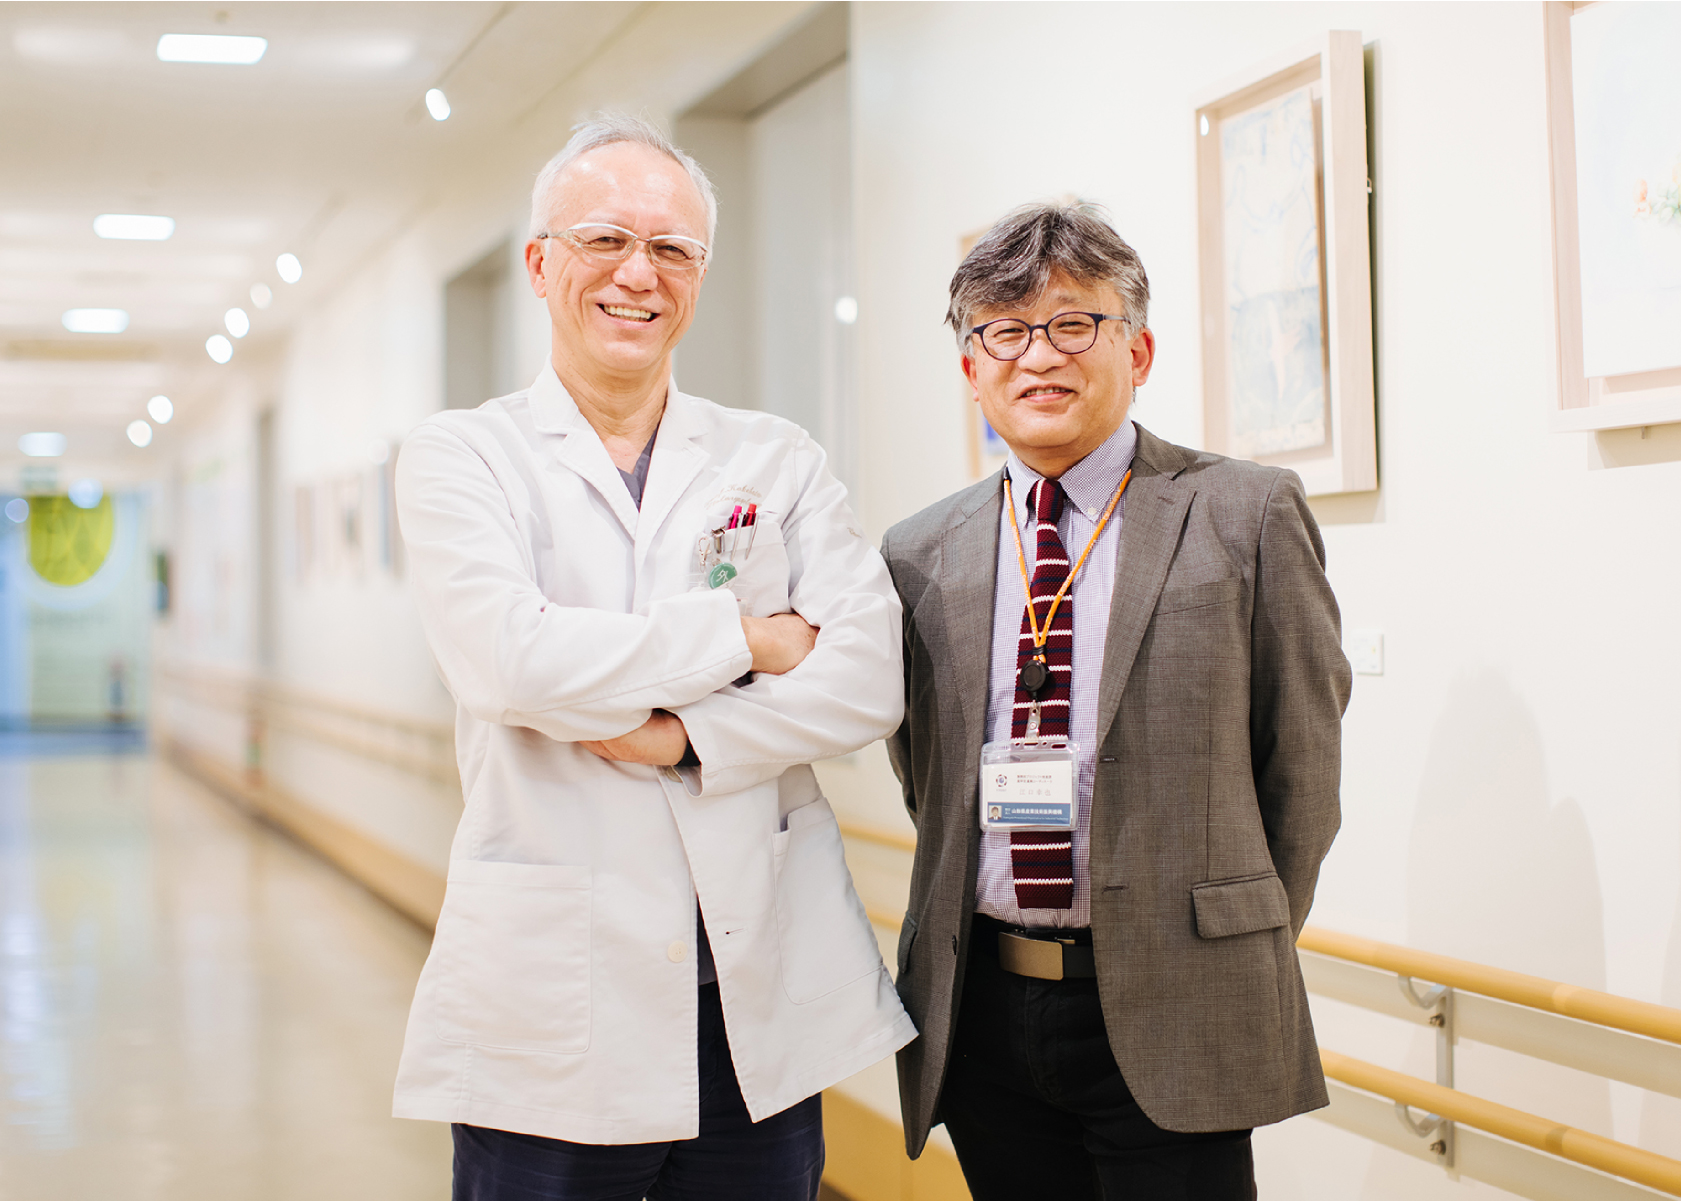 Crafting “experiences” and developing “people,” starting with manufacturing in Yamagata and then becoming the global standard through collaboration between medicine and engineering 